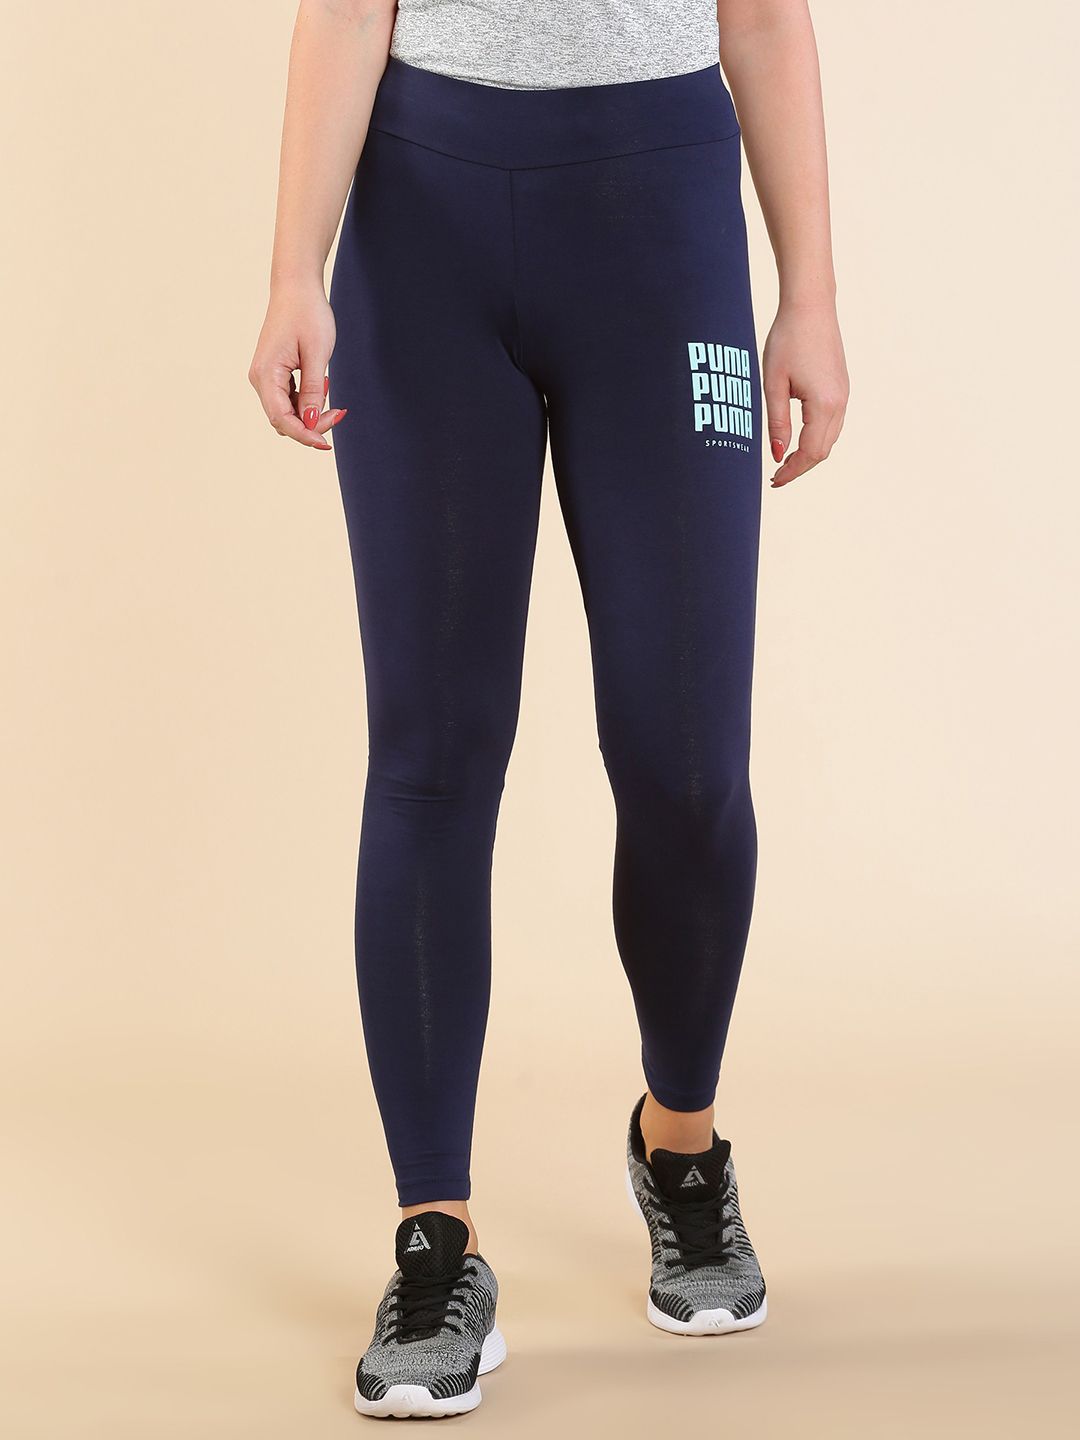 Puma Women Navy Blue Brand Logo Wmn Graphic Cropped Tights Price in India